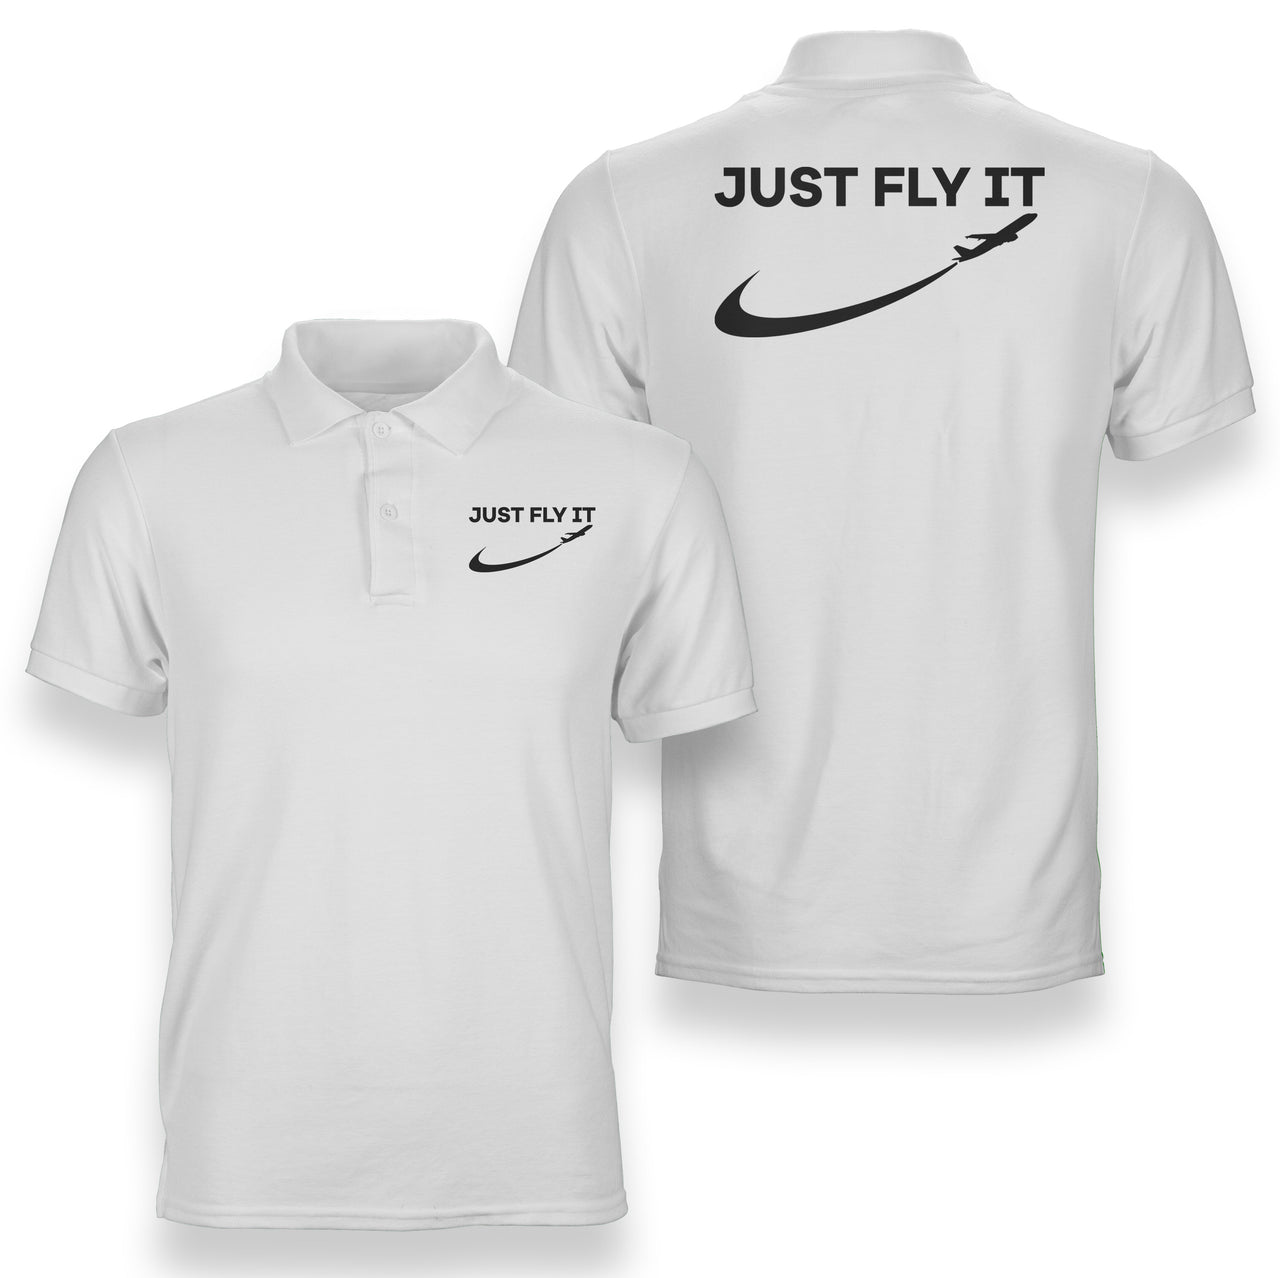 Just Fly It 2 Designed Double Side Polo T-Shirts